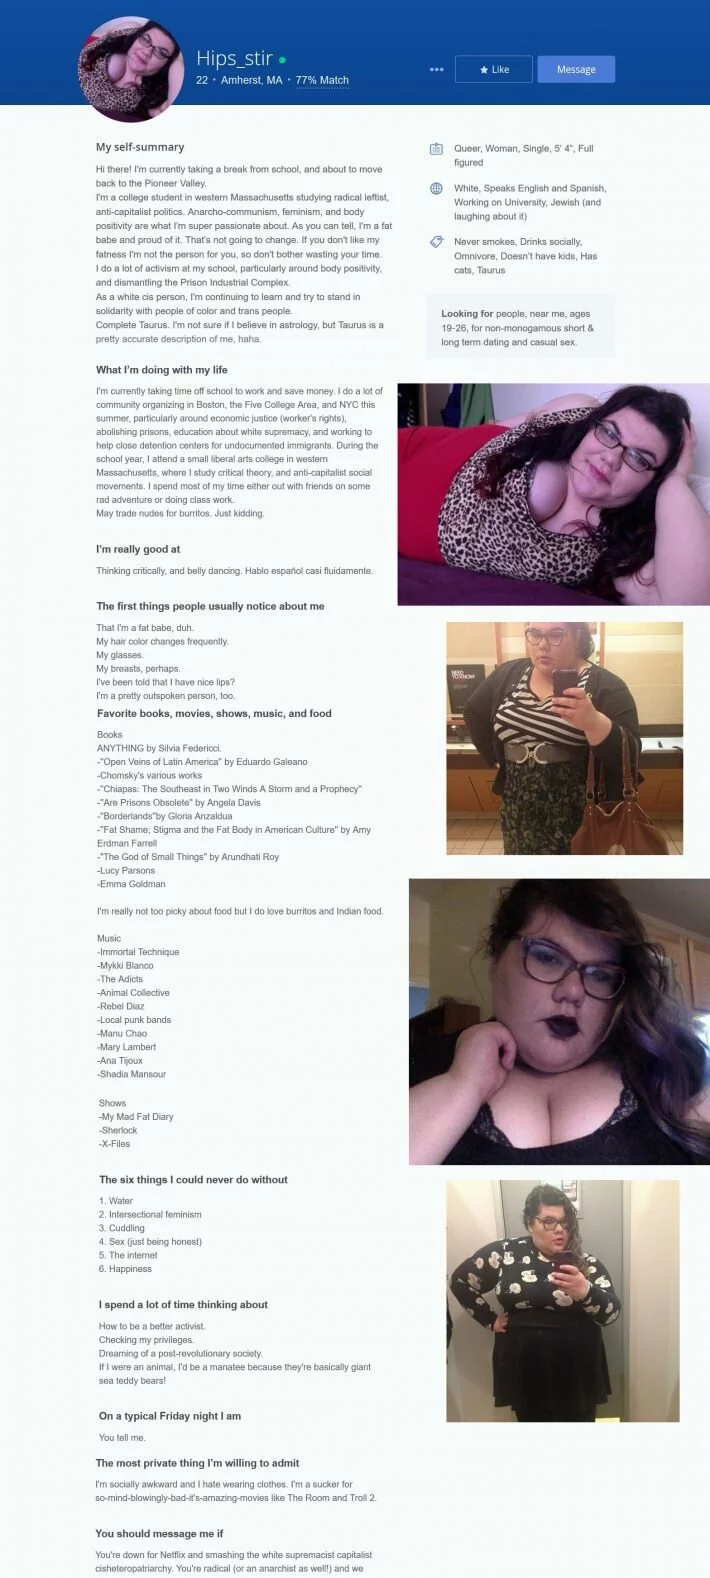 Triggly_Puff_Dating_Profile